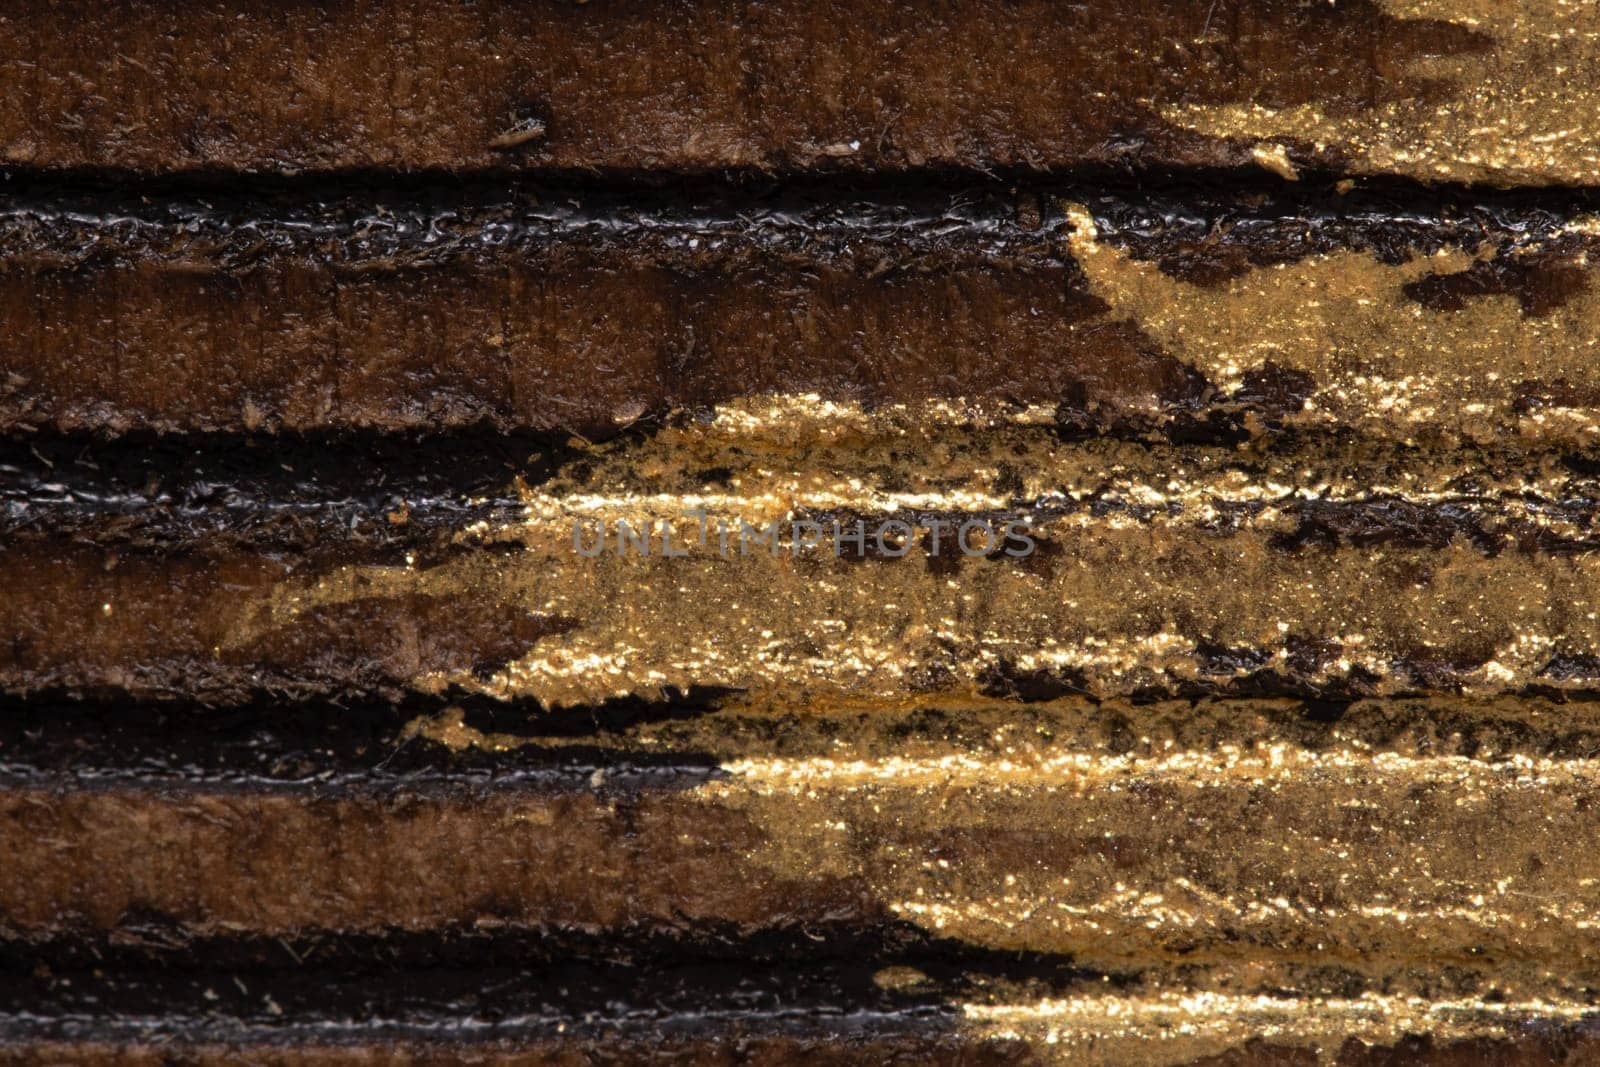 This image features a close-up shot of a textured surface with alternating golden and black stripes, showcasing intricate detail and a metallic sheen.